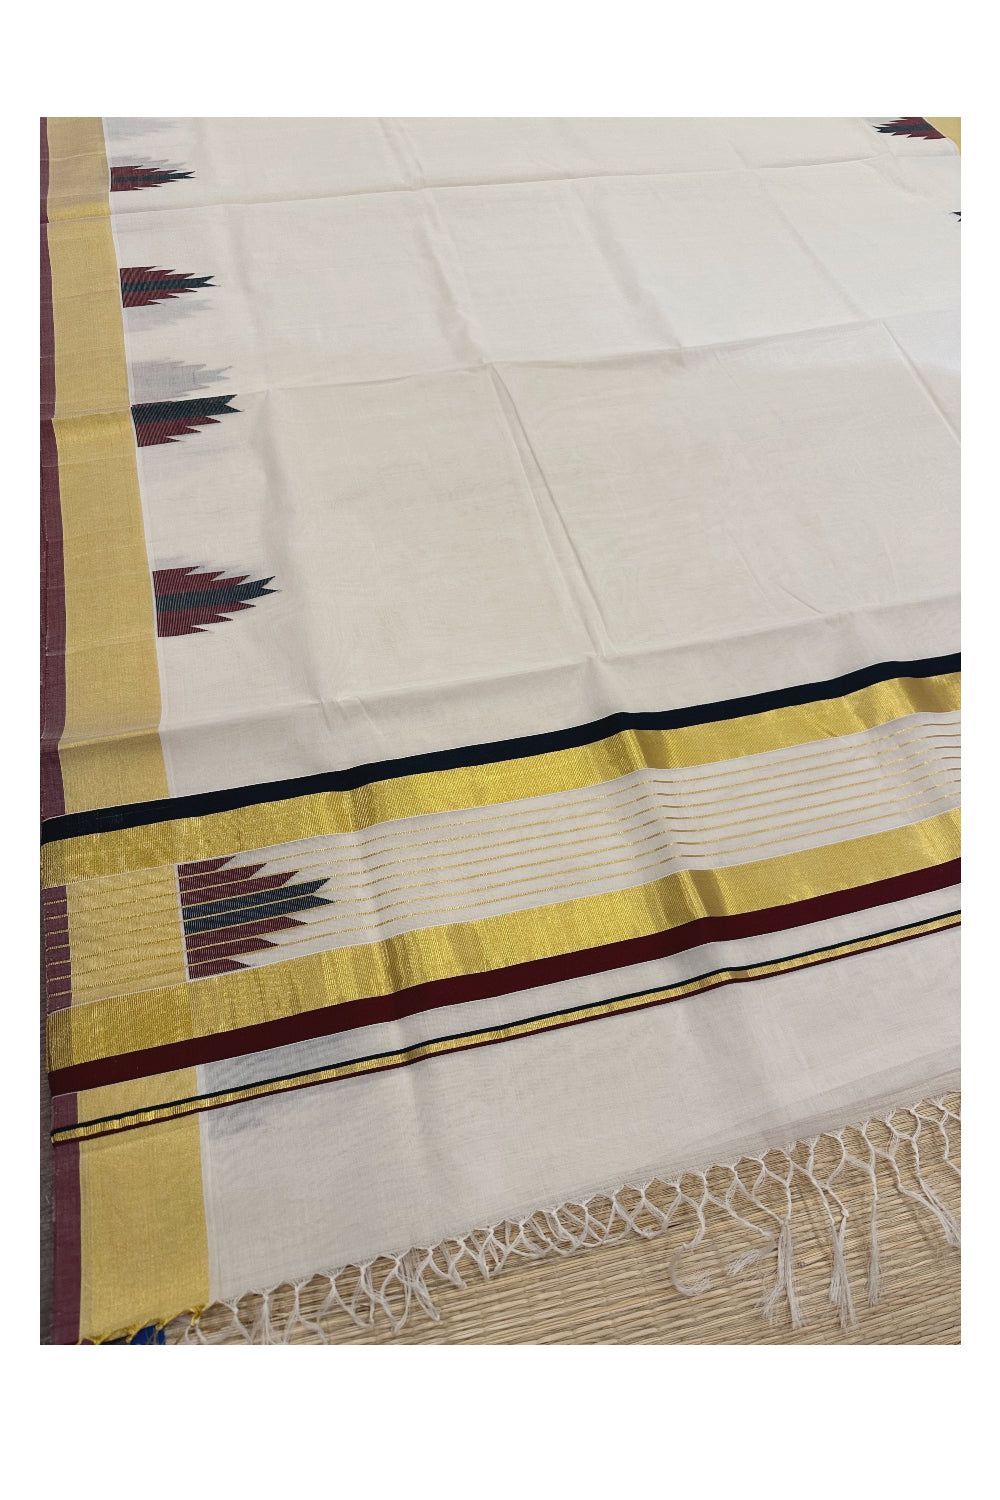 Southloom Premium Handloom Kasavu Saree with Woven Black and Maroon Temple Border (include Lines Kasavu Blouse Piece with Temple)